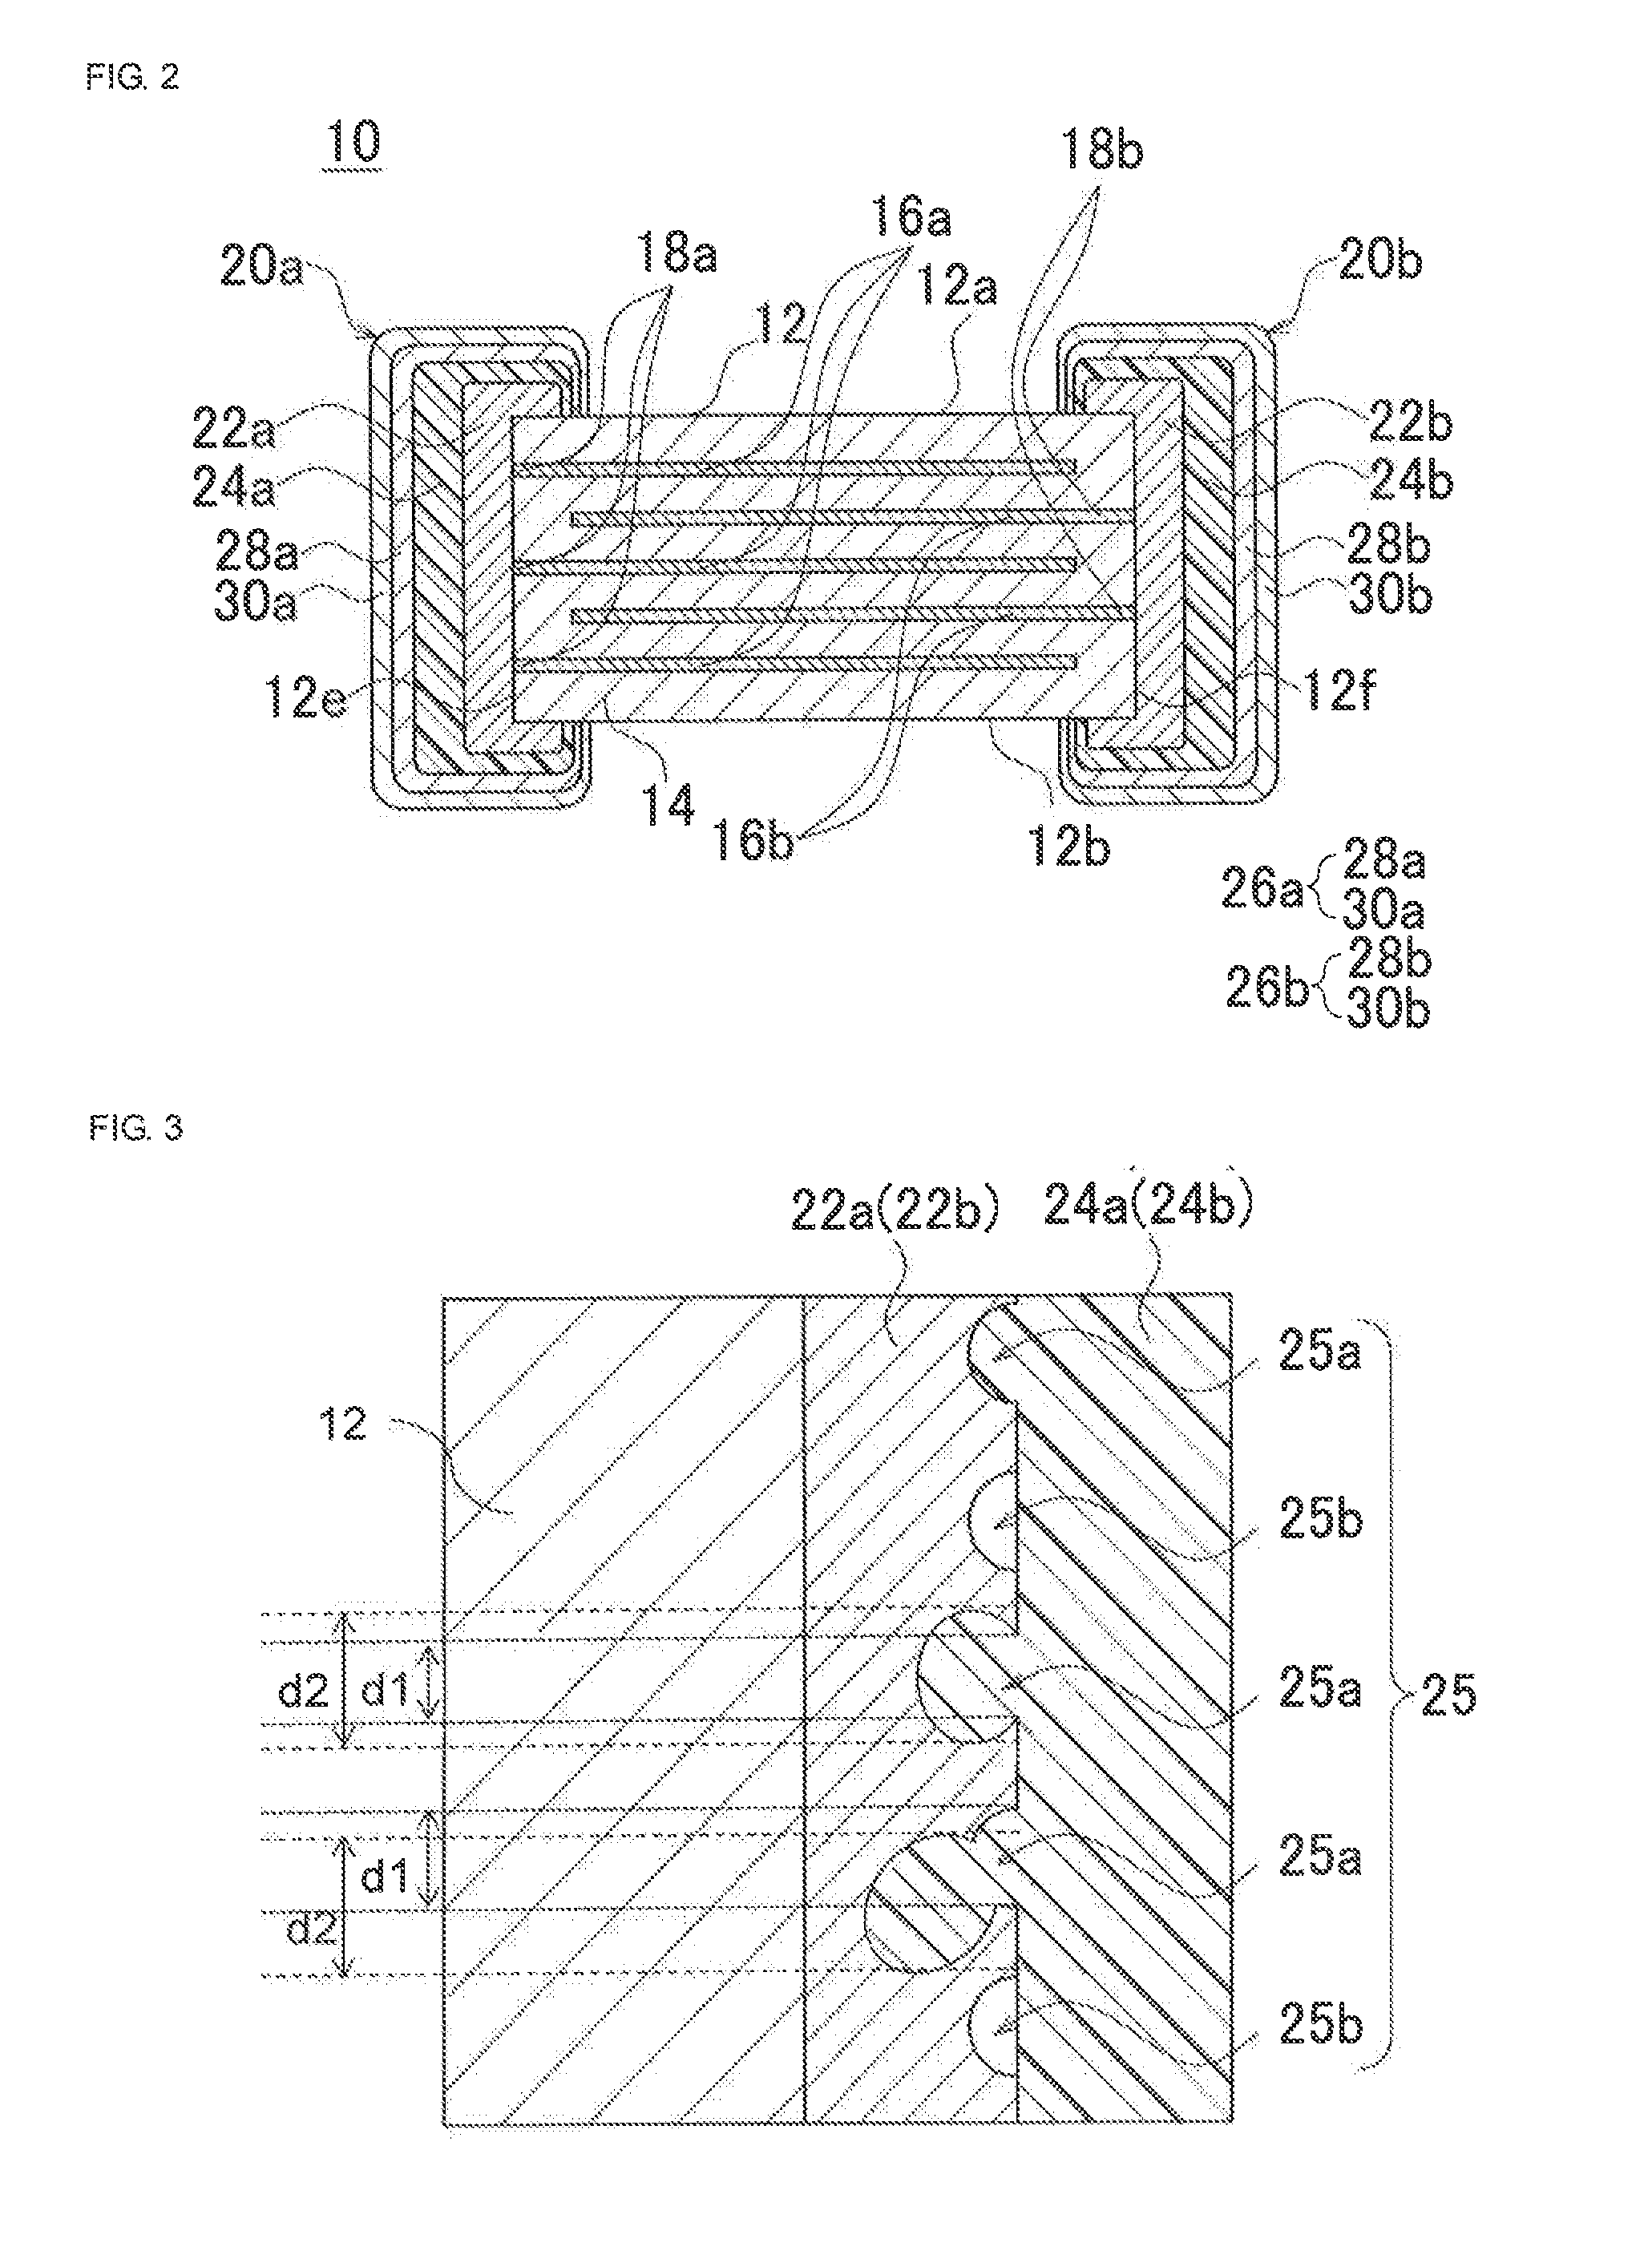 Multilayer ceramic electronic component